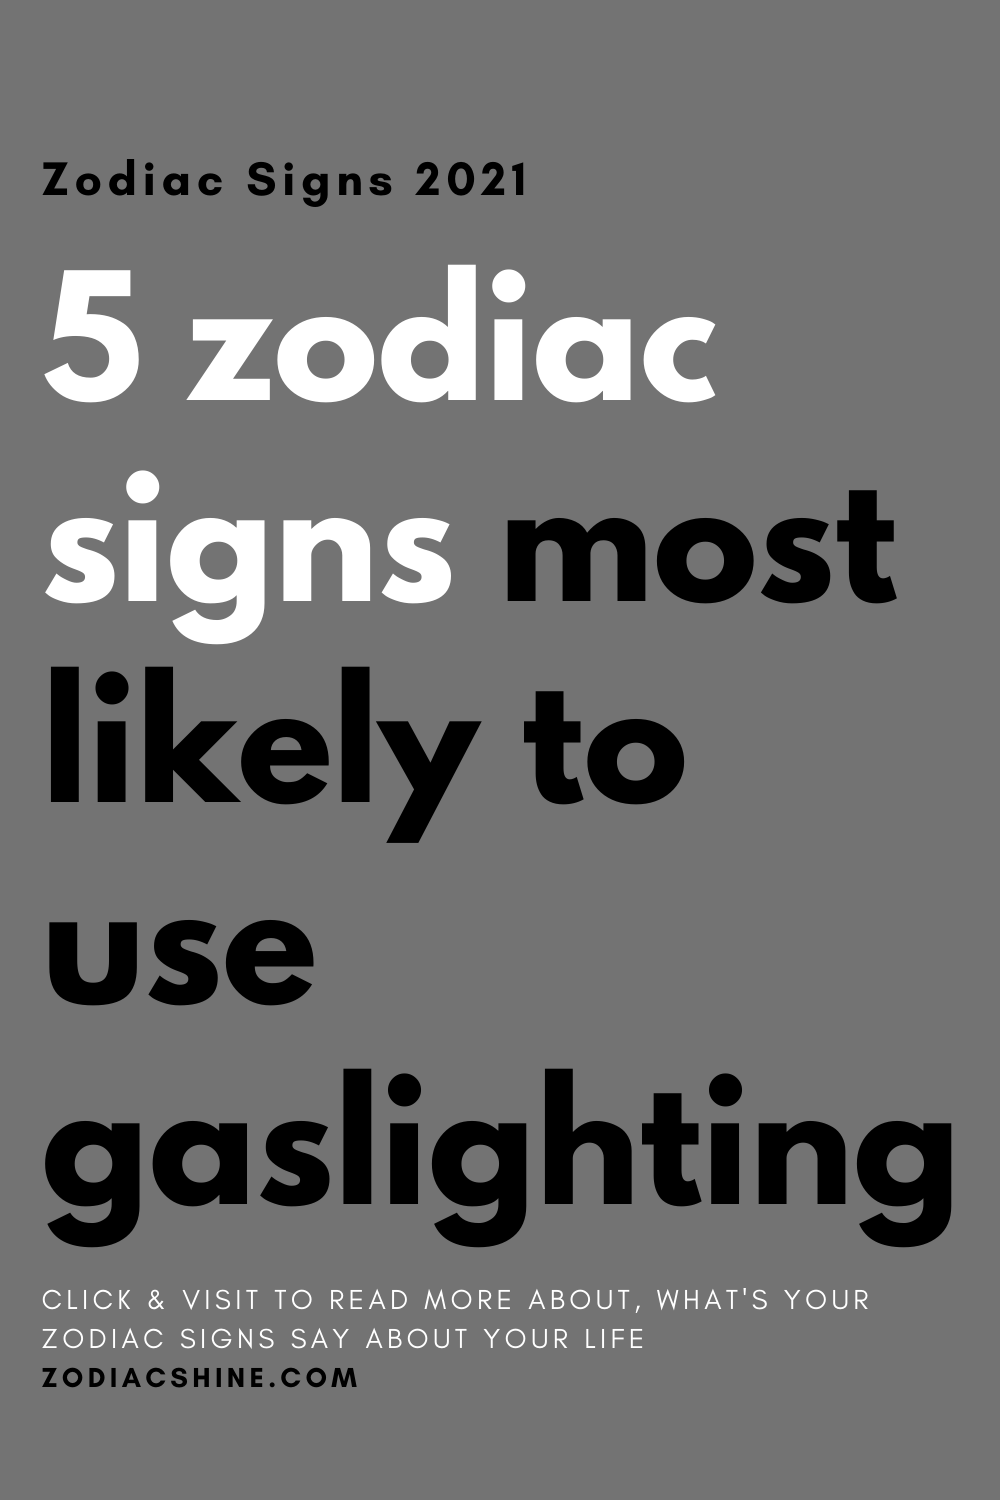 5 zodiac signs most likely to use gaslighting